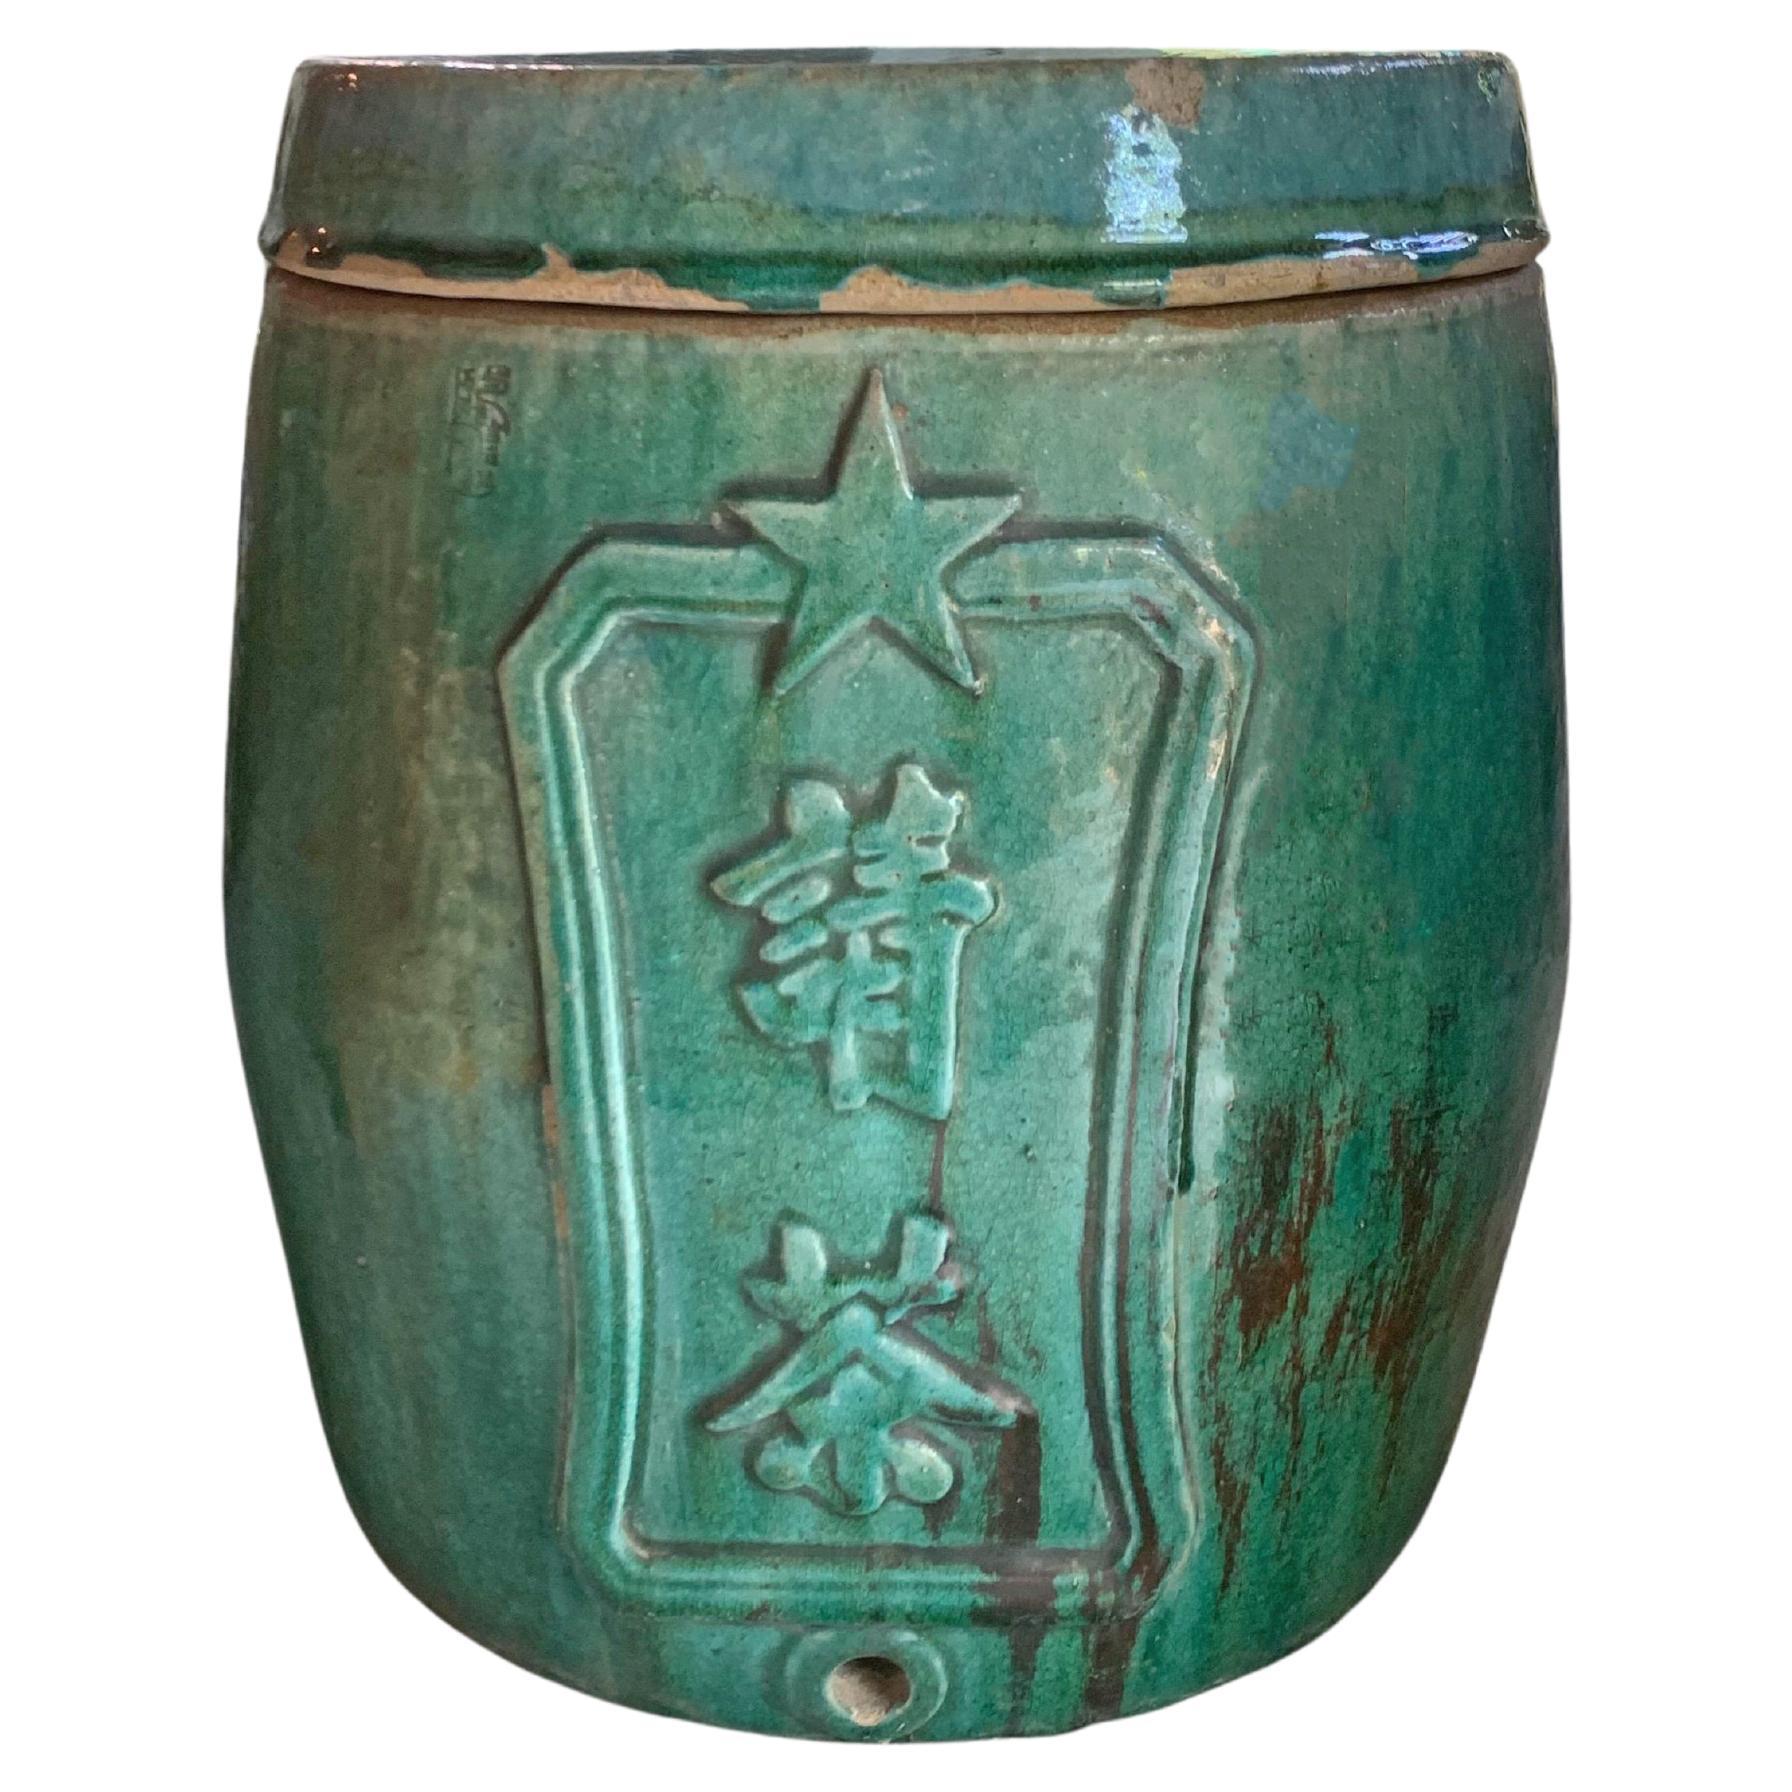 Chinese Ceramic Shiwan Tea Dispenser Jar with Engraved Characters, c. 1950 For Sale